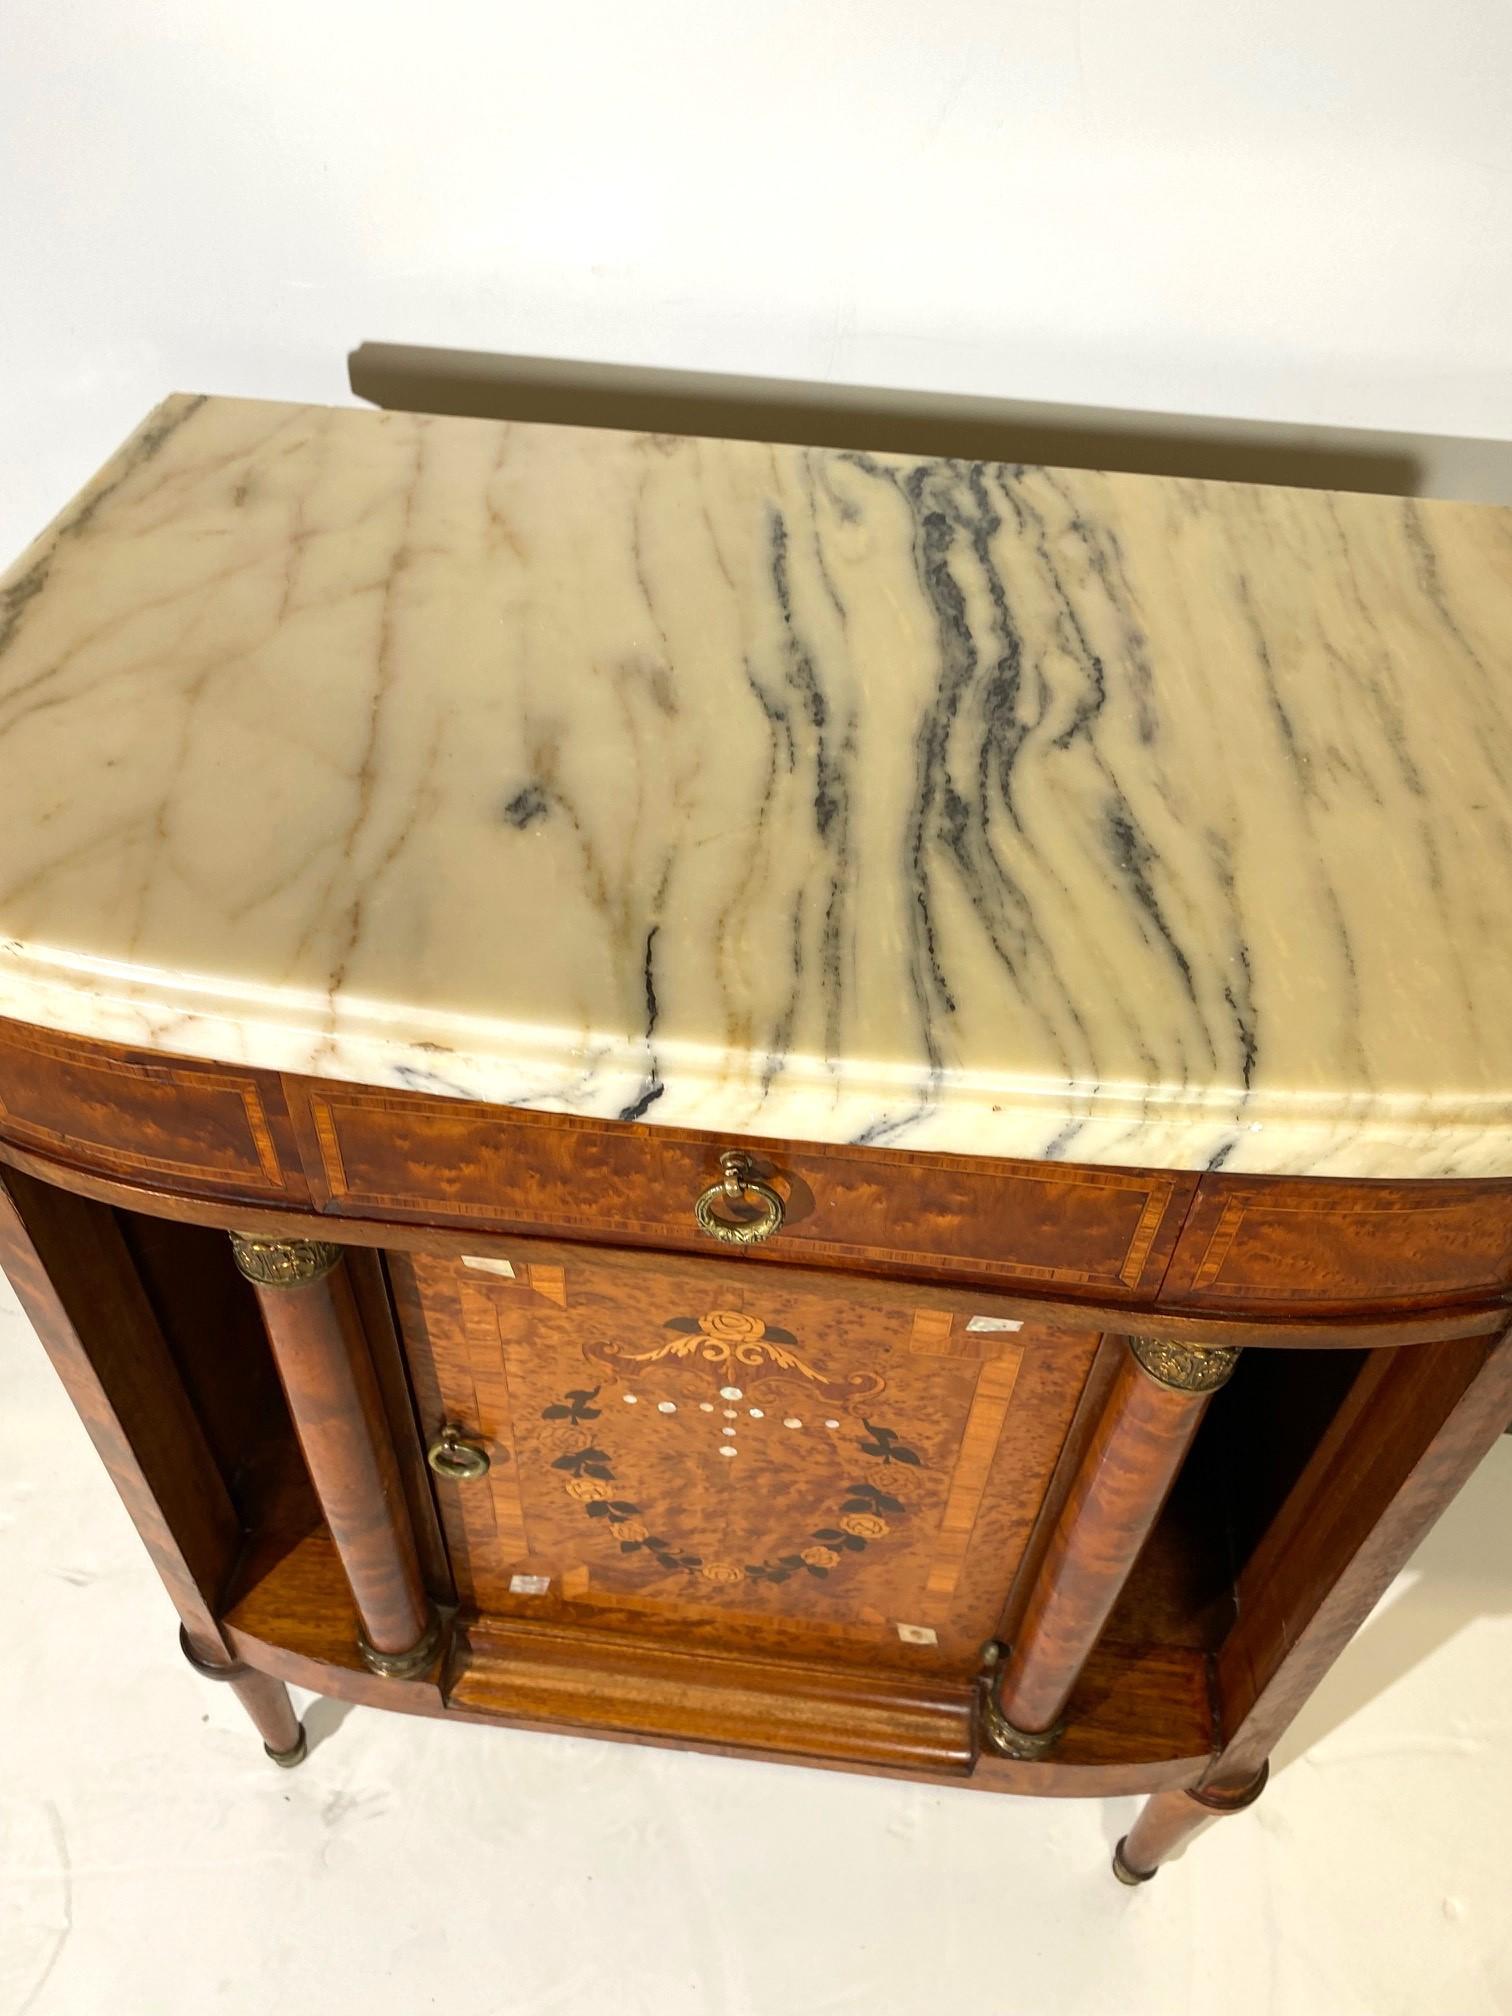 French Empire marble top cabinet. Center door with a burlwood marquetry panel showing floral decoration of mother-of-pearl inlays. Kingwood crossbanding to the drawers and doors. Pillars fitted with gilt metal mounts in classical design. c1900 